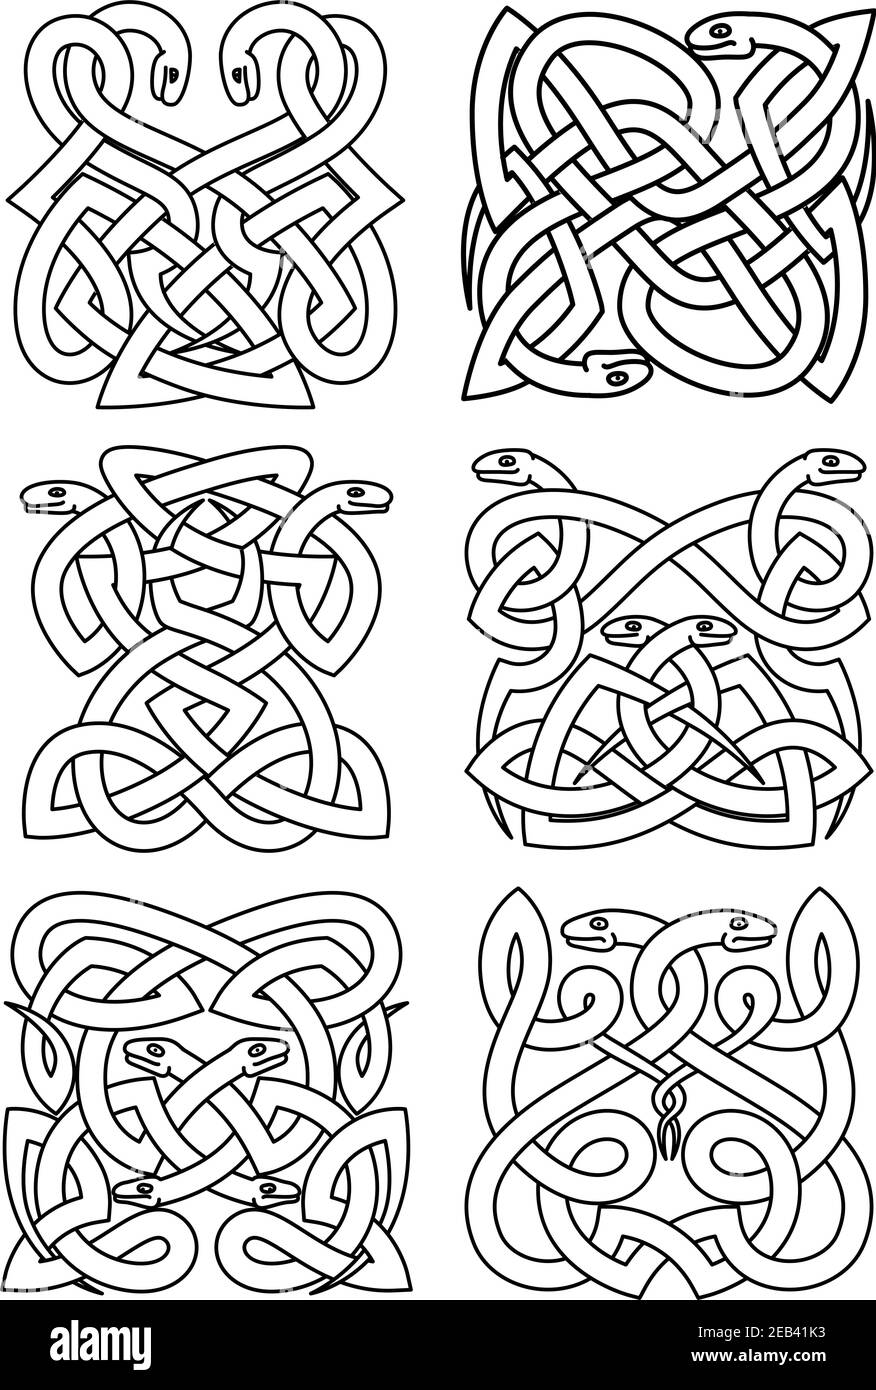 Gothic celtic animal patterns of coiled snakes in traditional knot ornaments. Vintage embellishment, totem, pattern, tattoo or t-shirt print usage Stock Vector